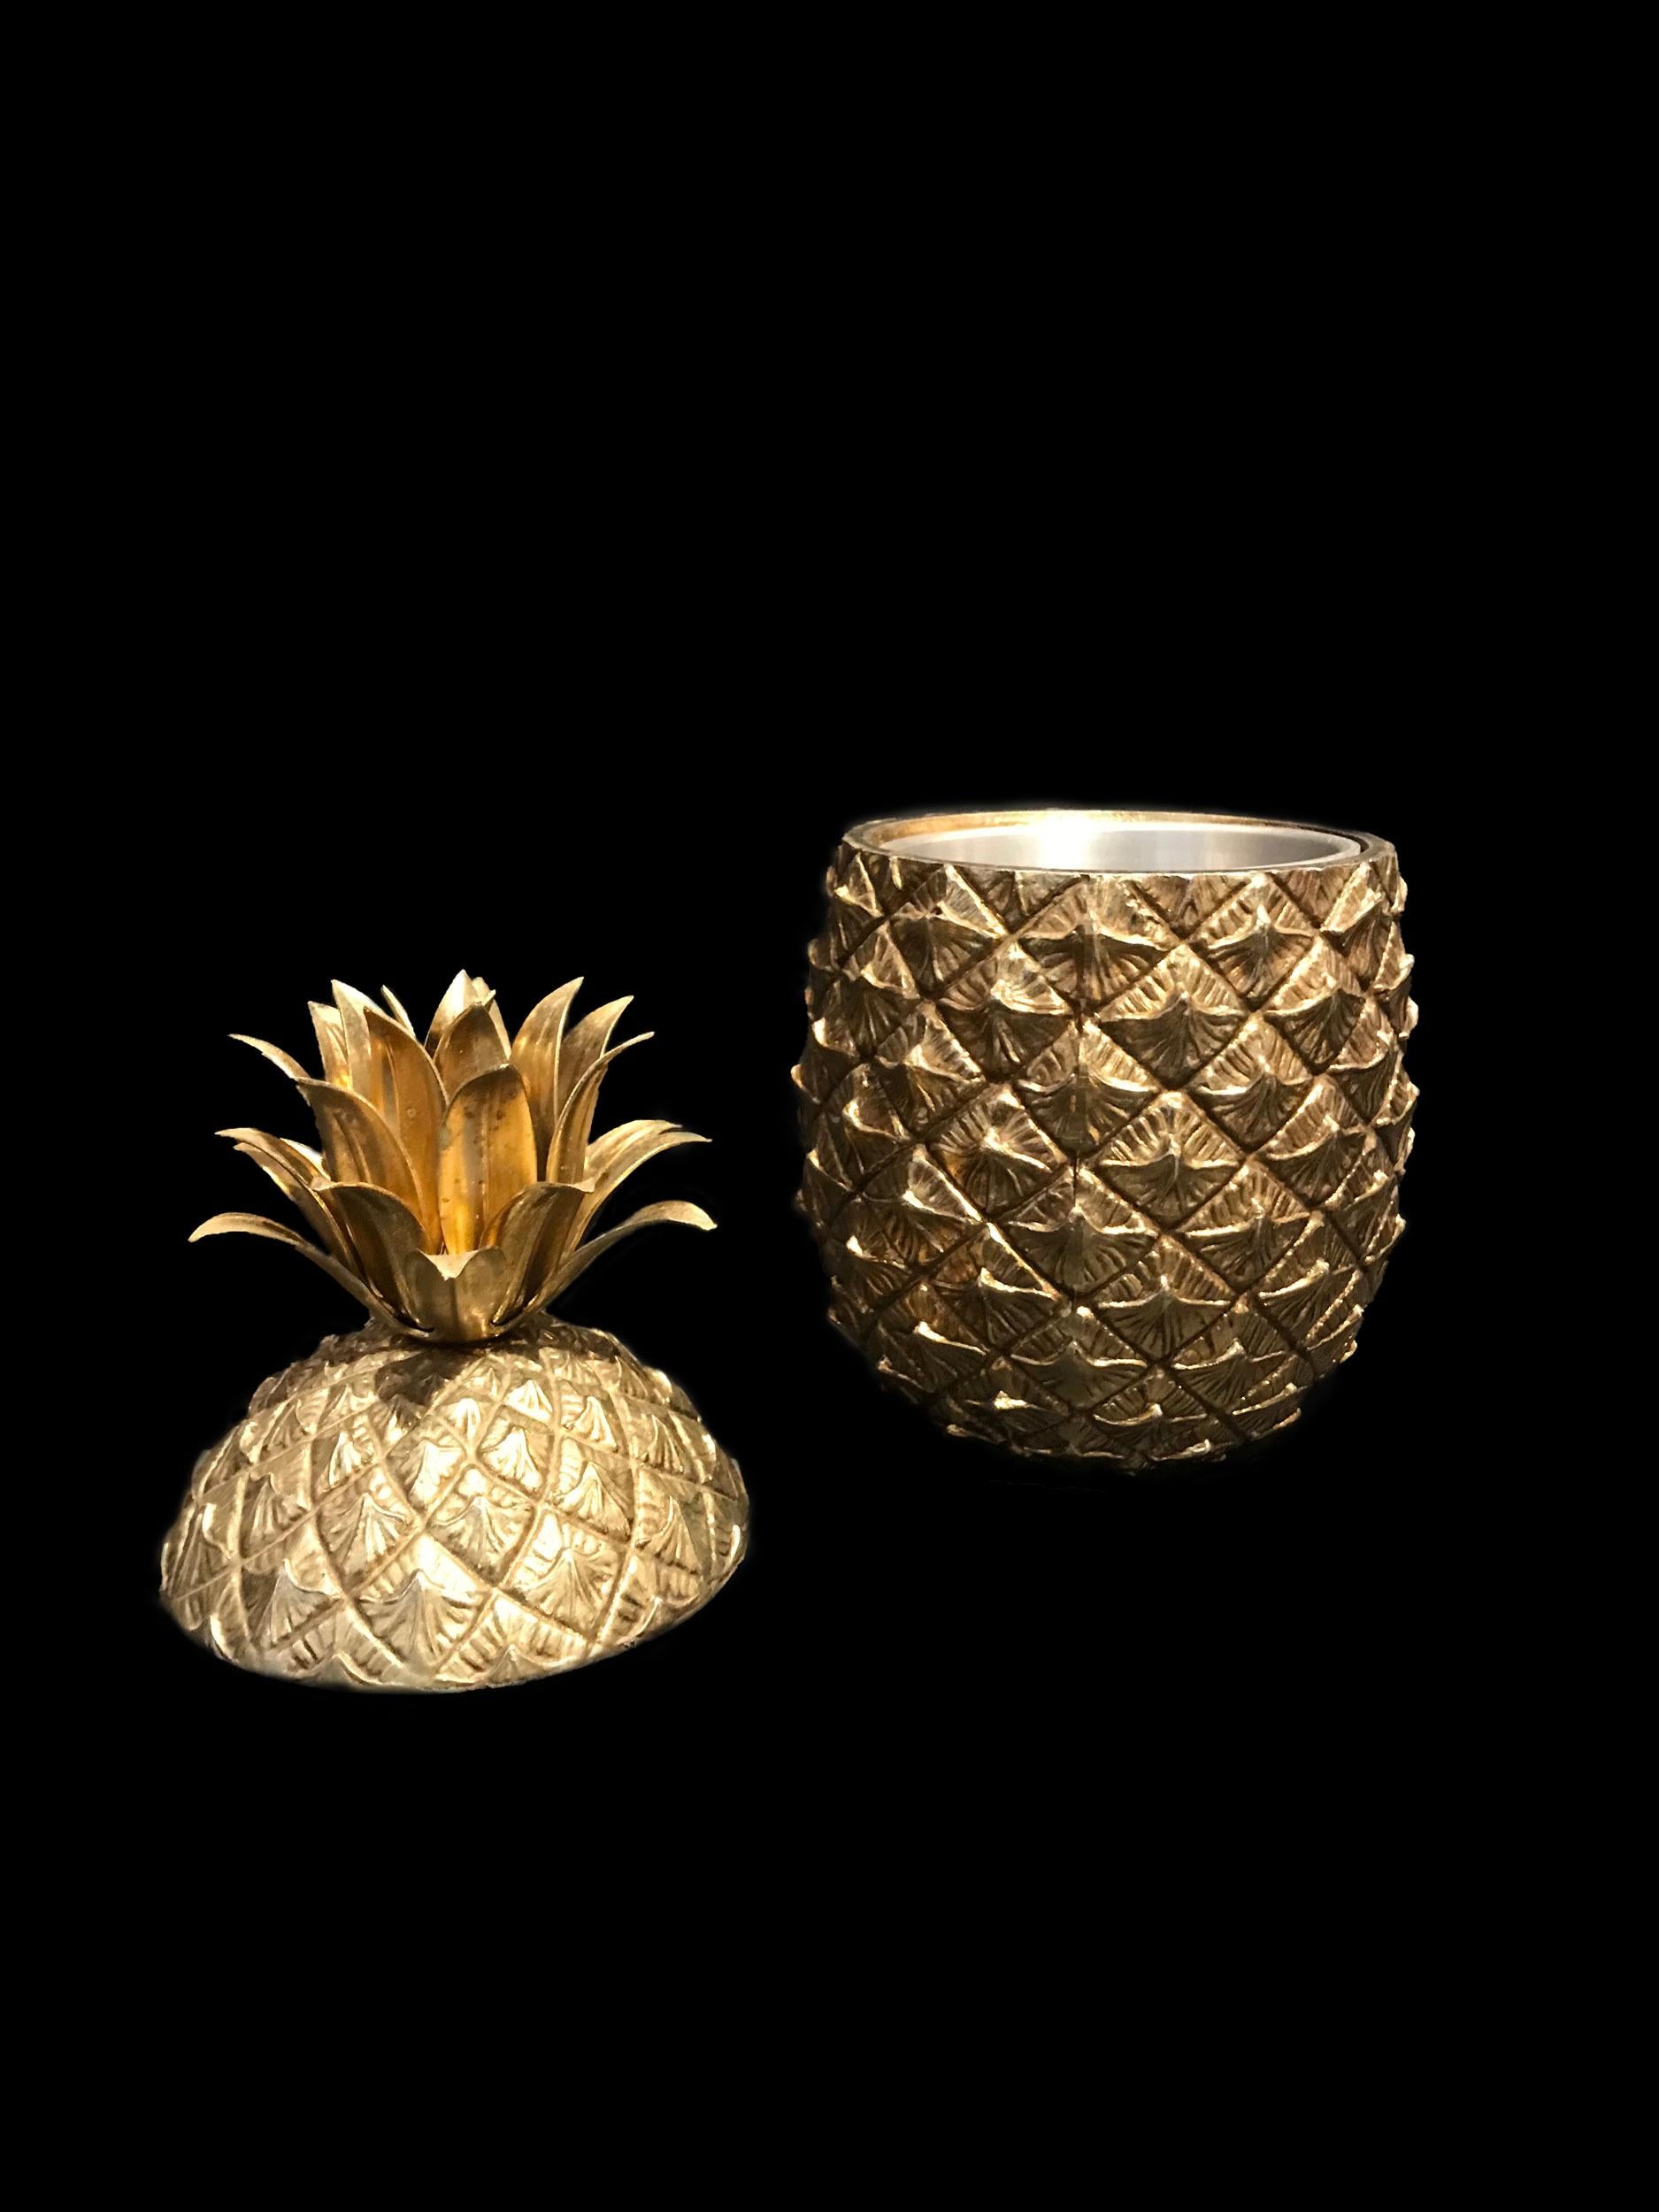 The pineapple ice bucket, designed by Mauro Manetti is world-famous and even has been copied many times!
The original and first productions had inside made of metal. The outside of this one is in gilt cast aluminium.
Mark beneath the base 